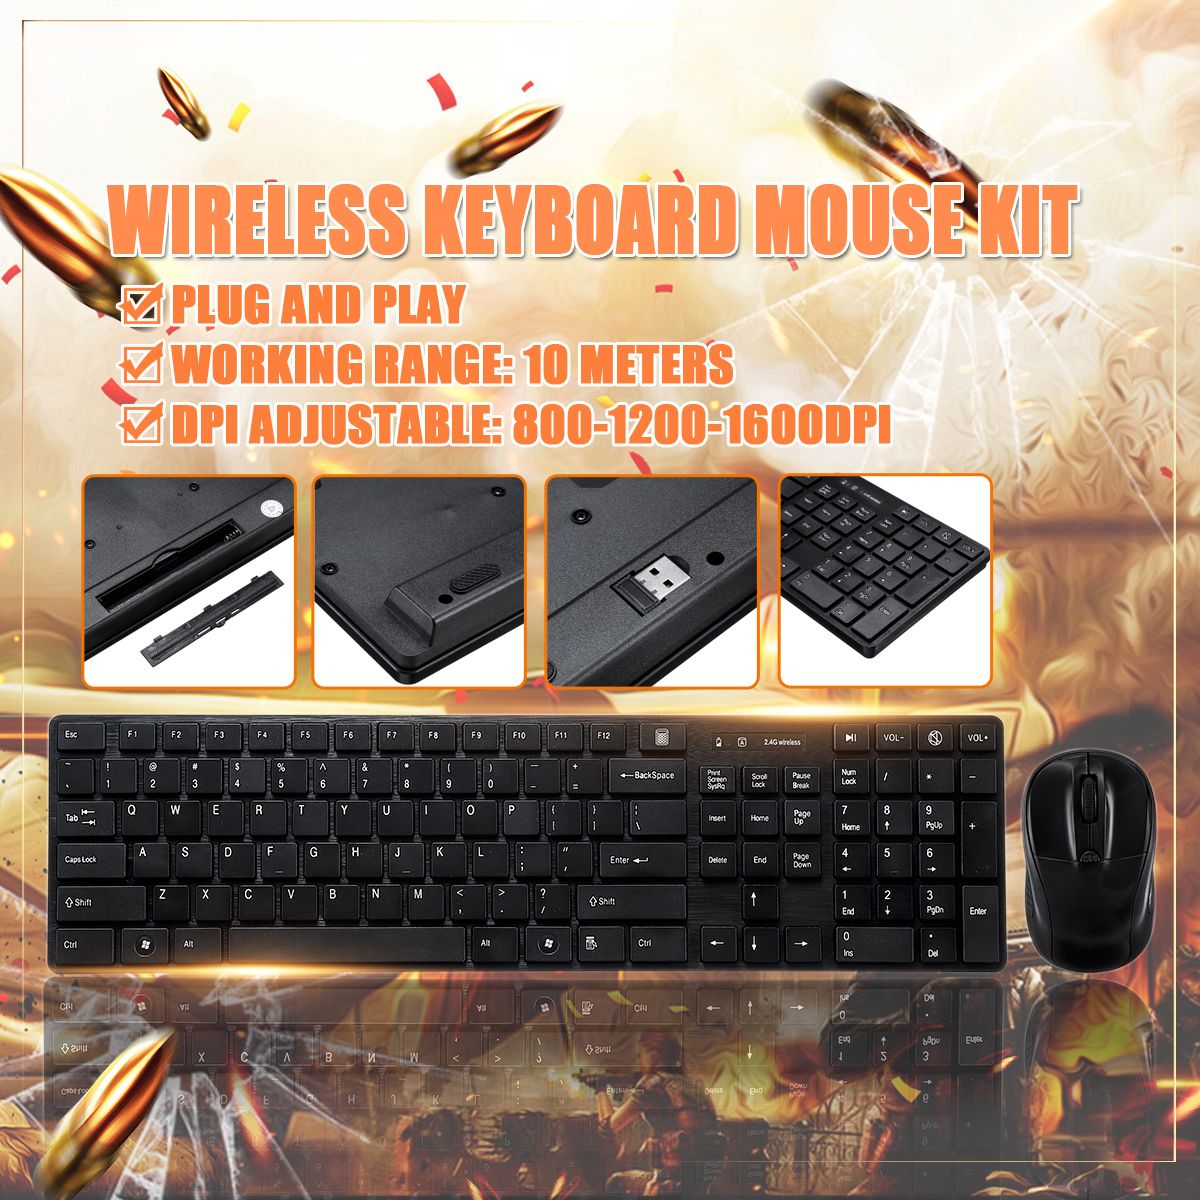 800-1200-1600DPI-Adjustable-24-GHZ-Wireless-Chocolate-Keycaps-Keyboard-and-Mouse-Combo-for-Play-Gami-1599808